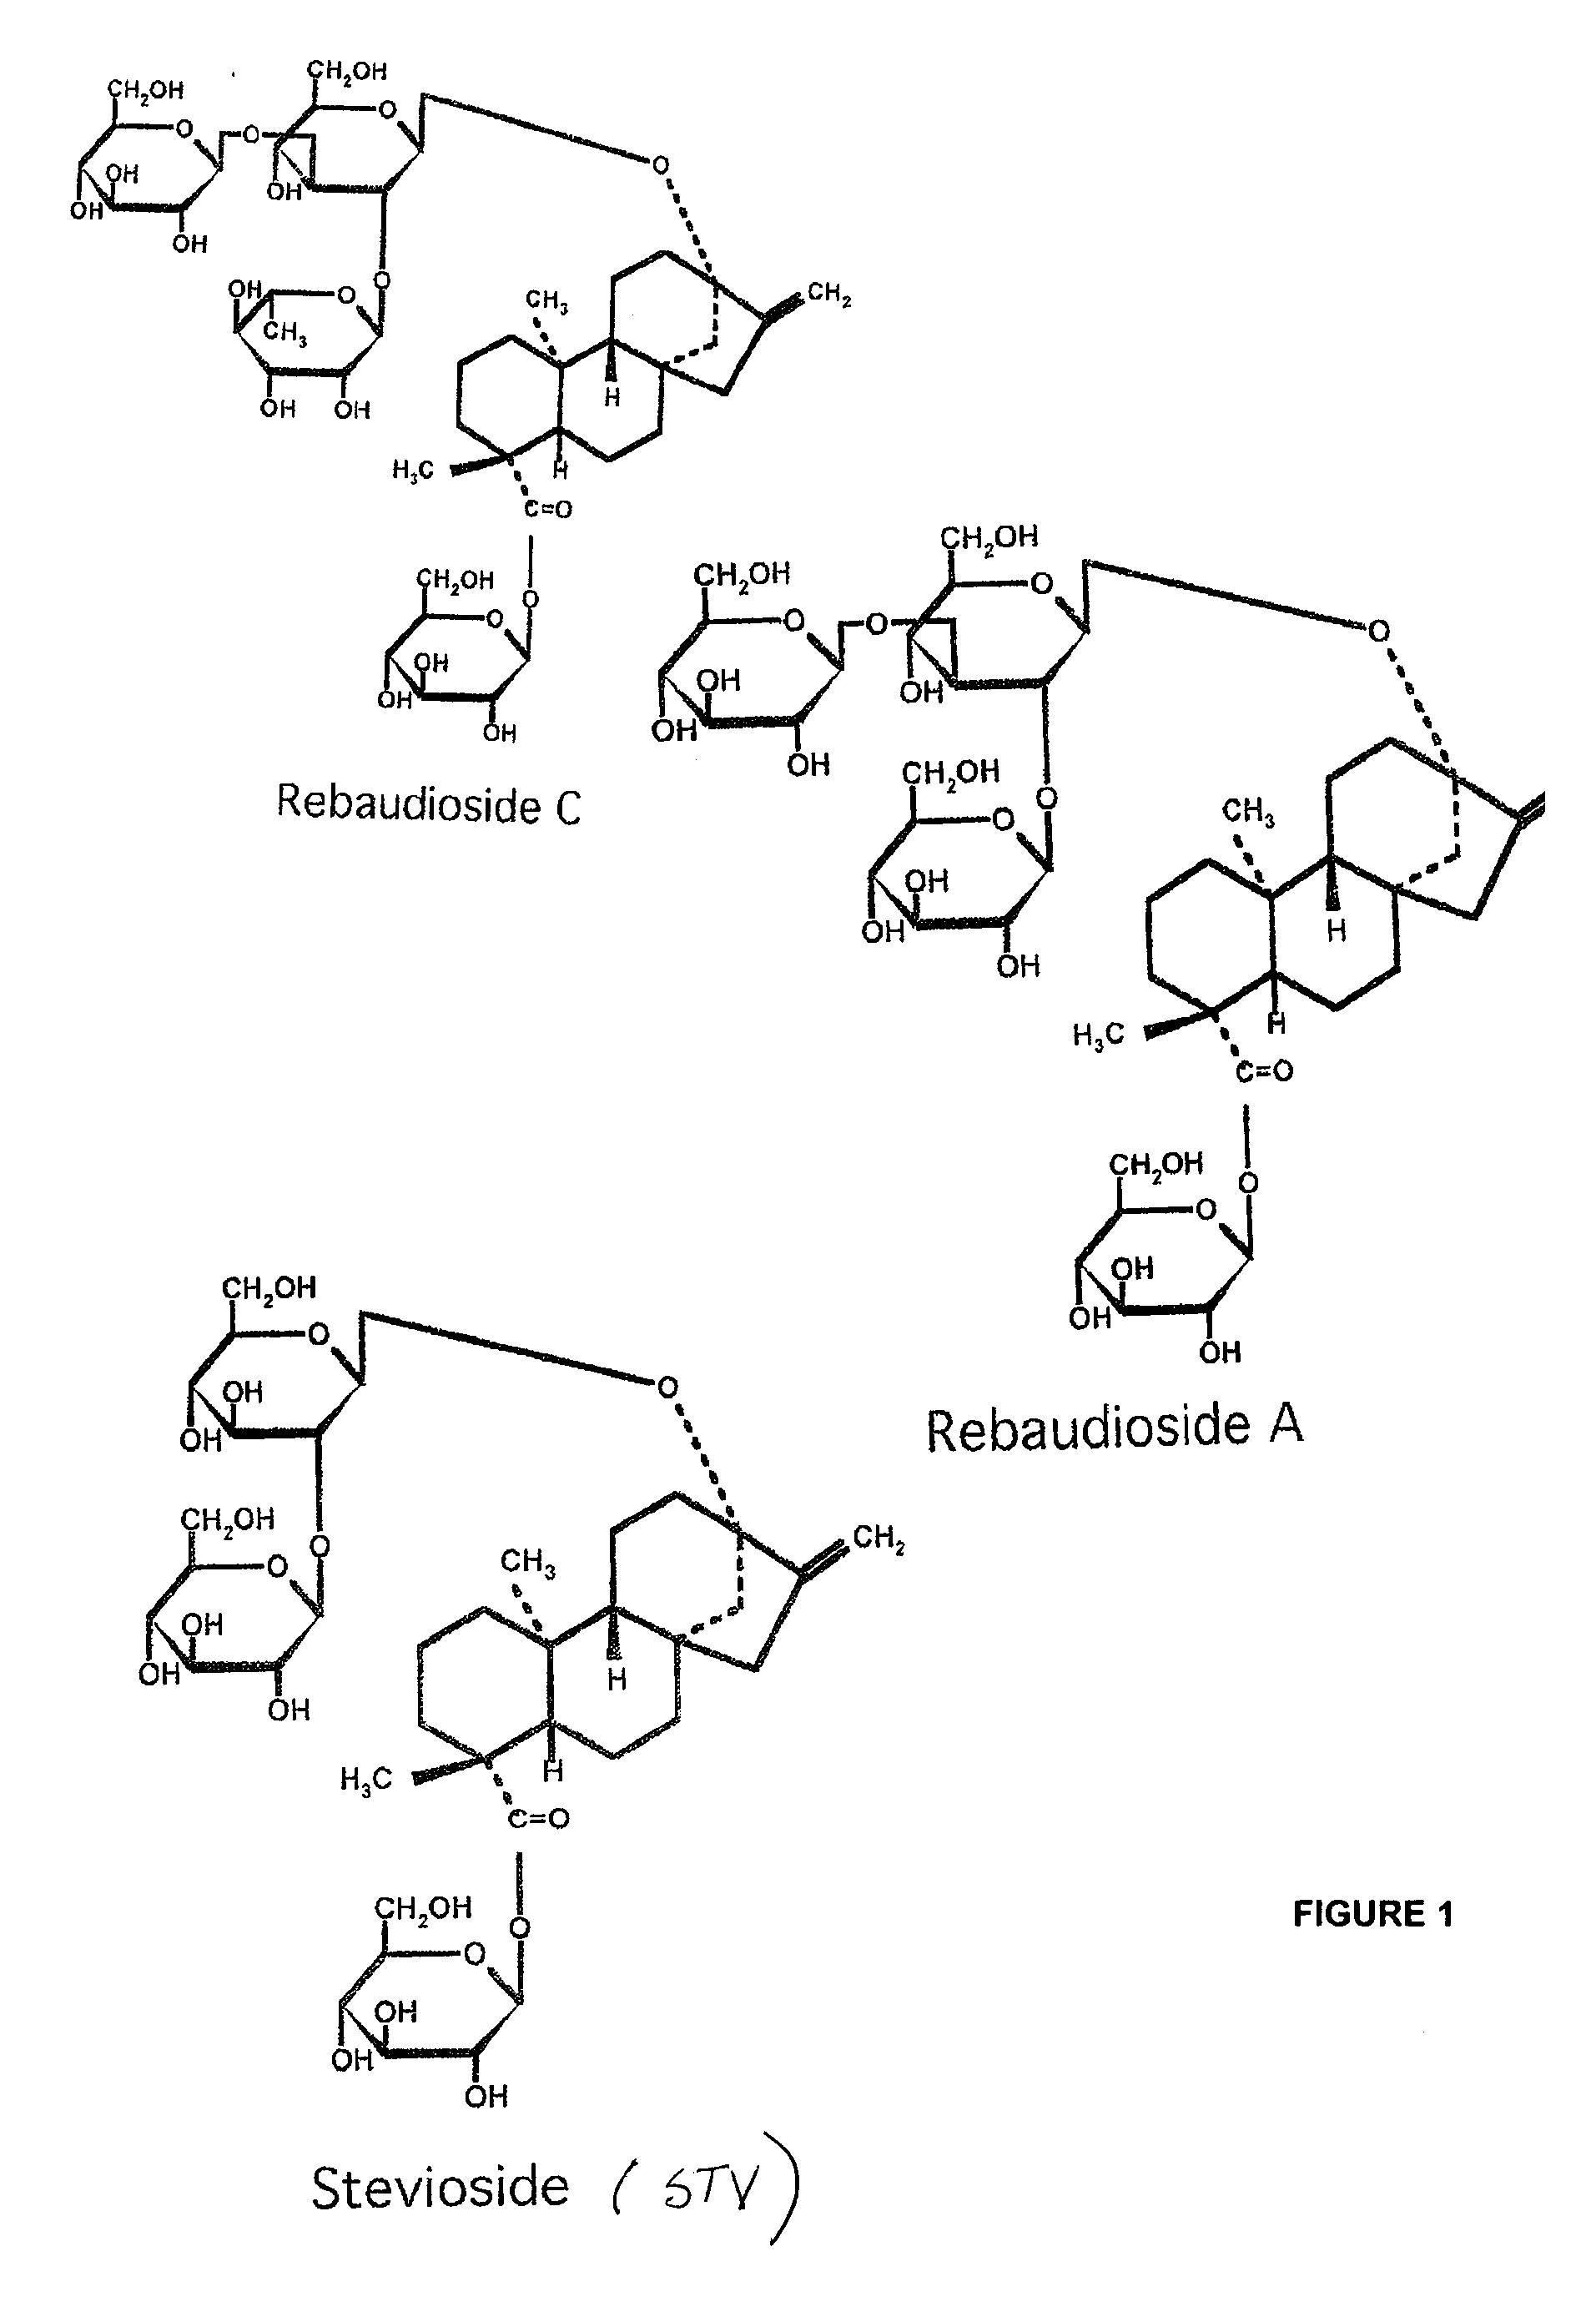 Sweetener Compositions and Methods of Making Same